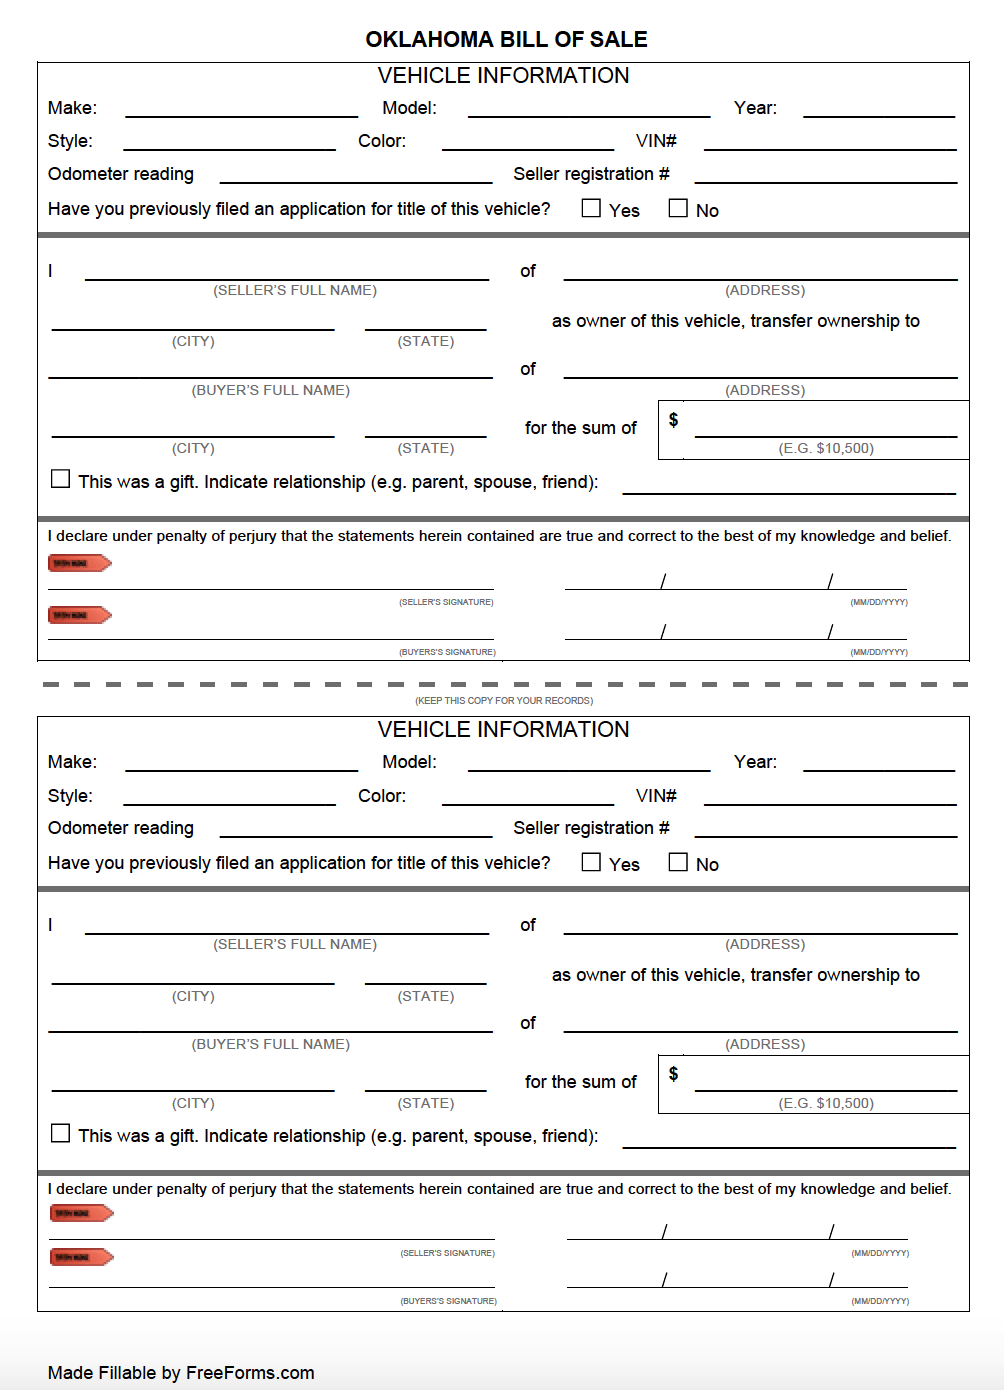 printable-vehicle-purchase-agreement-motorcycle-bill-of-sale-free-forms-templates-word-pdf